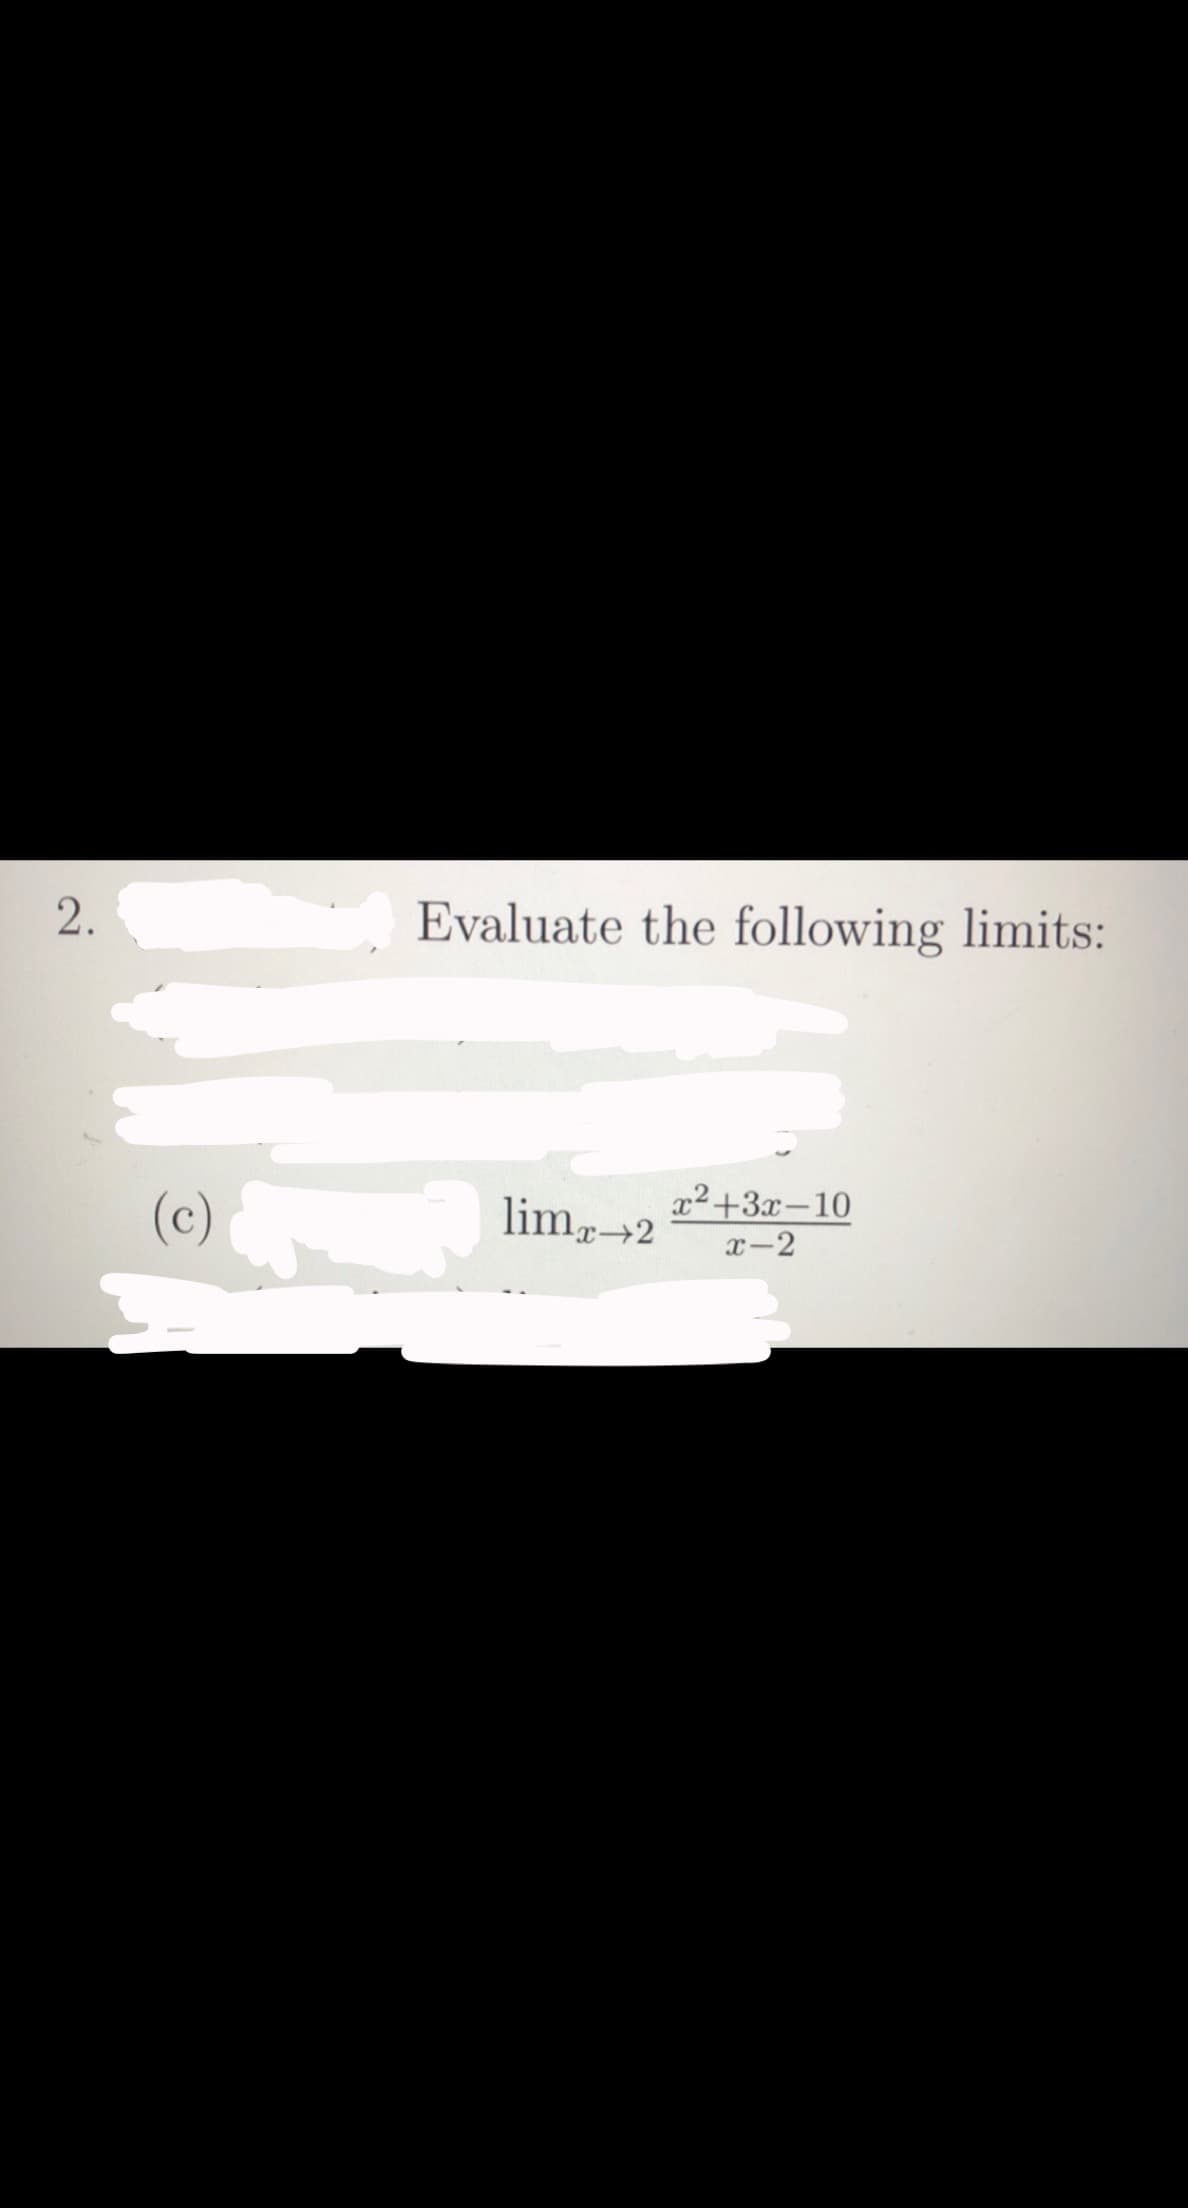 Evaluate the following limits:
(c)
lim 2
x2+3x-10
x-2
2.
